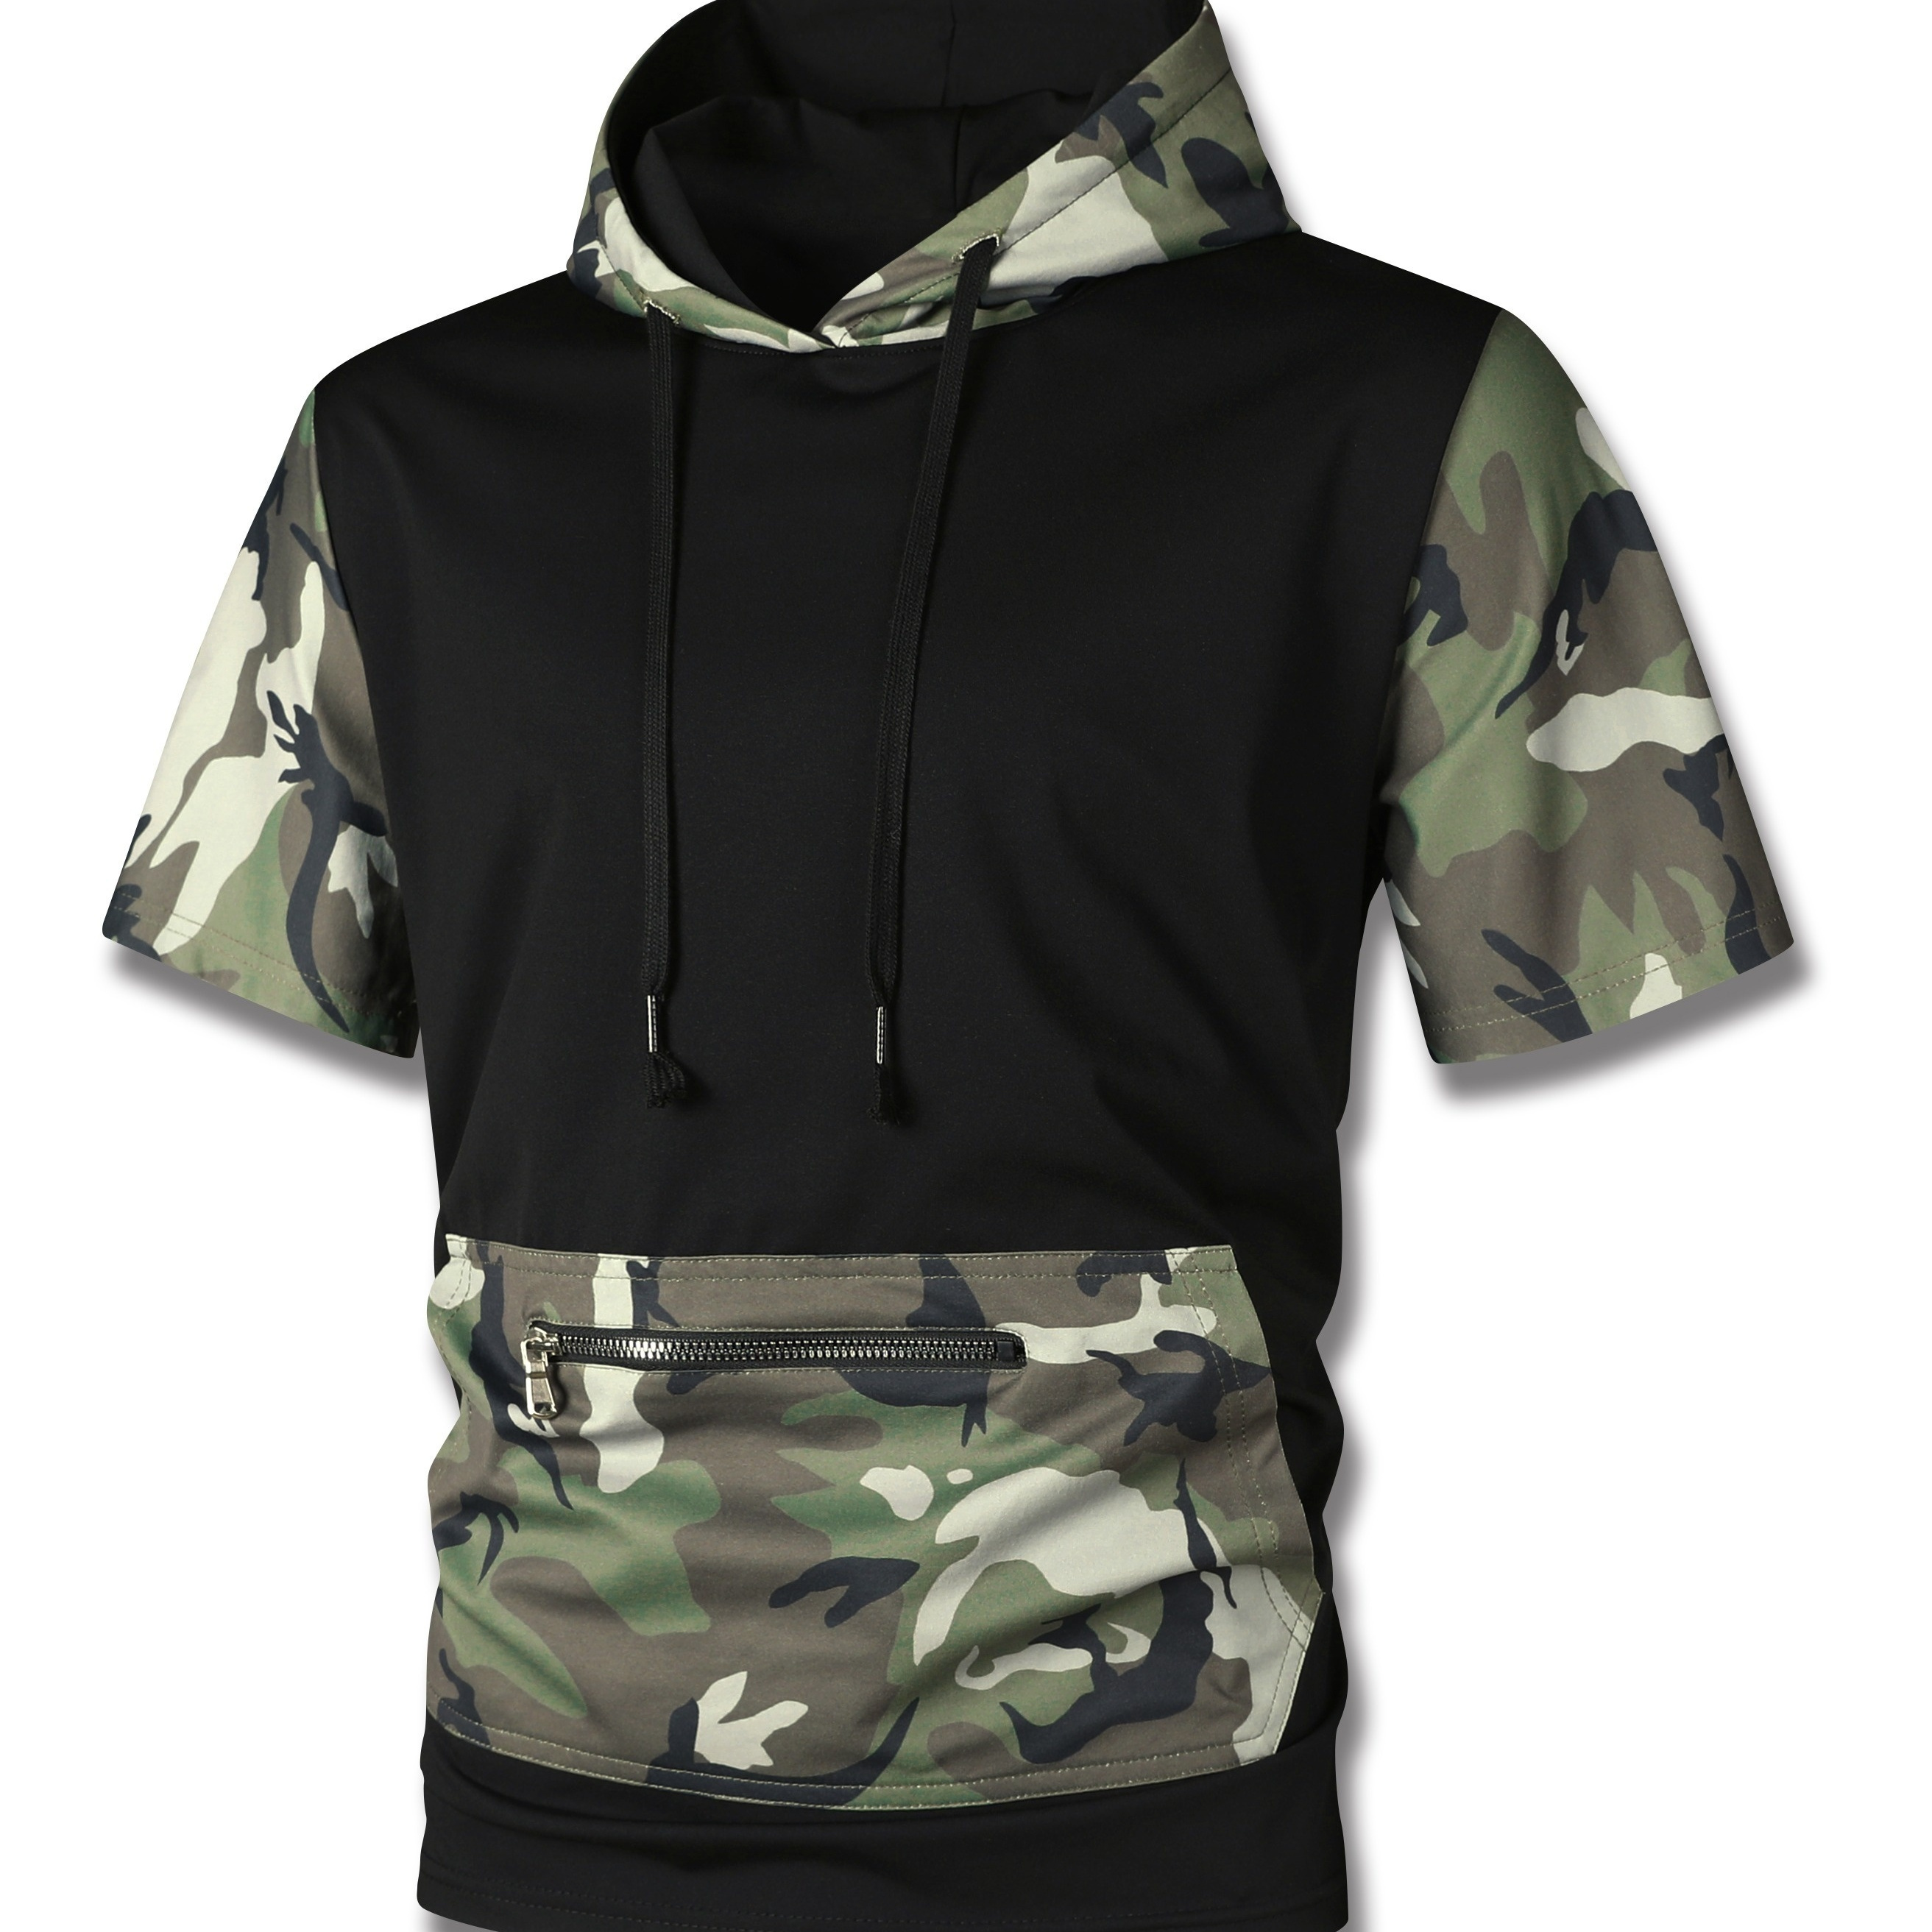 

Men's Camouflage Pattern Hooded Short Sleeve Sweatshirt With A Zippered Kangaroo Pocket, Stylish And Chic Hoodie For Summer Outdoors Wear